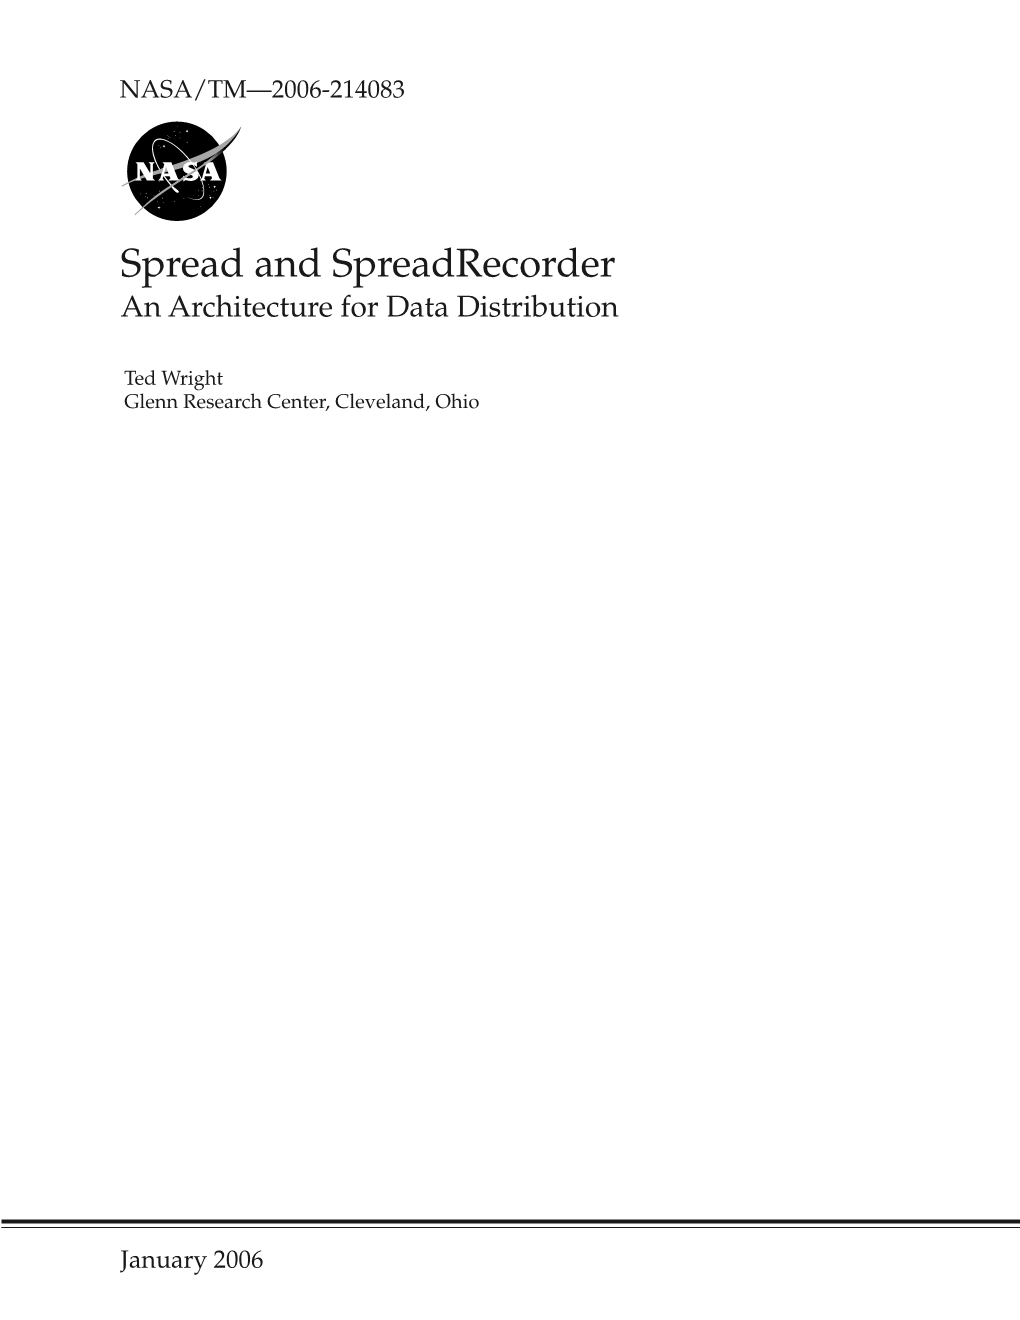 Spread and Spreadrecorder an Architecture for Data Distribution